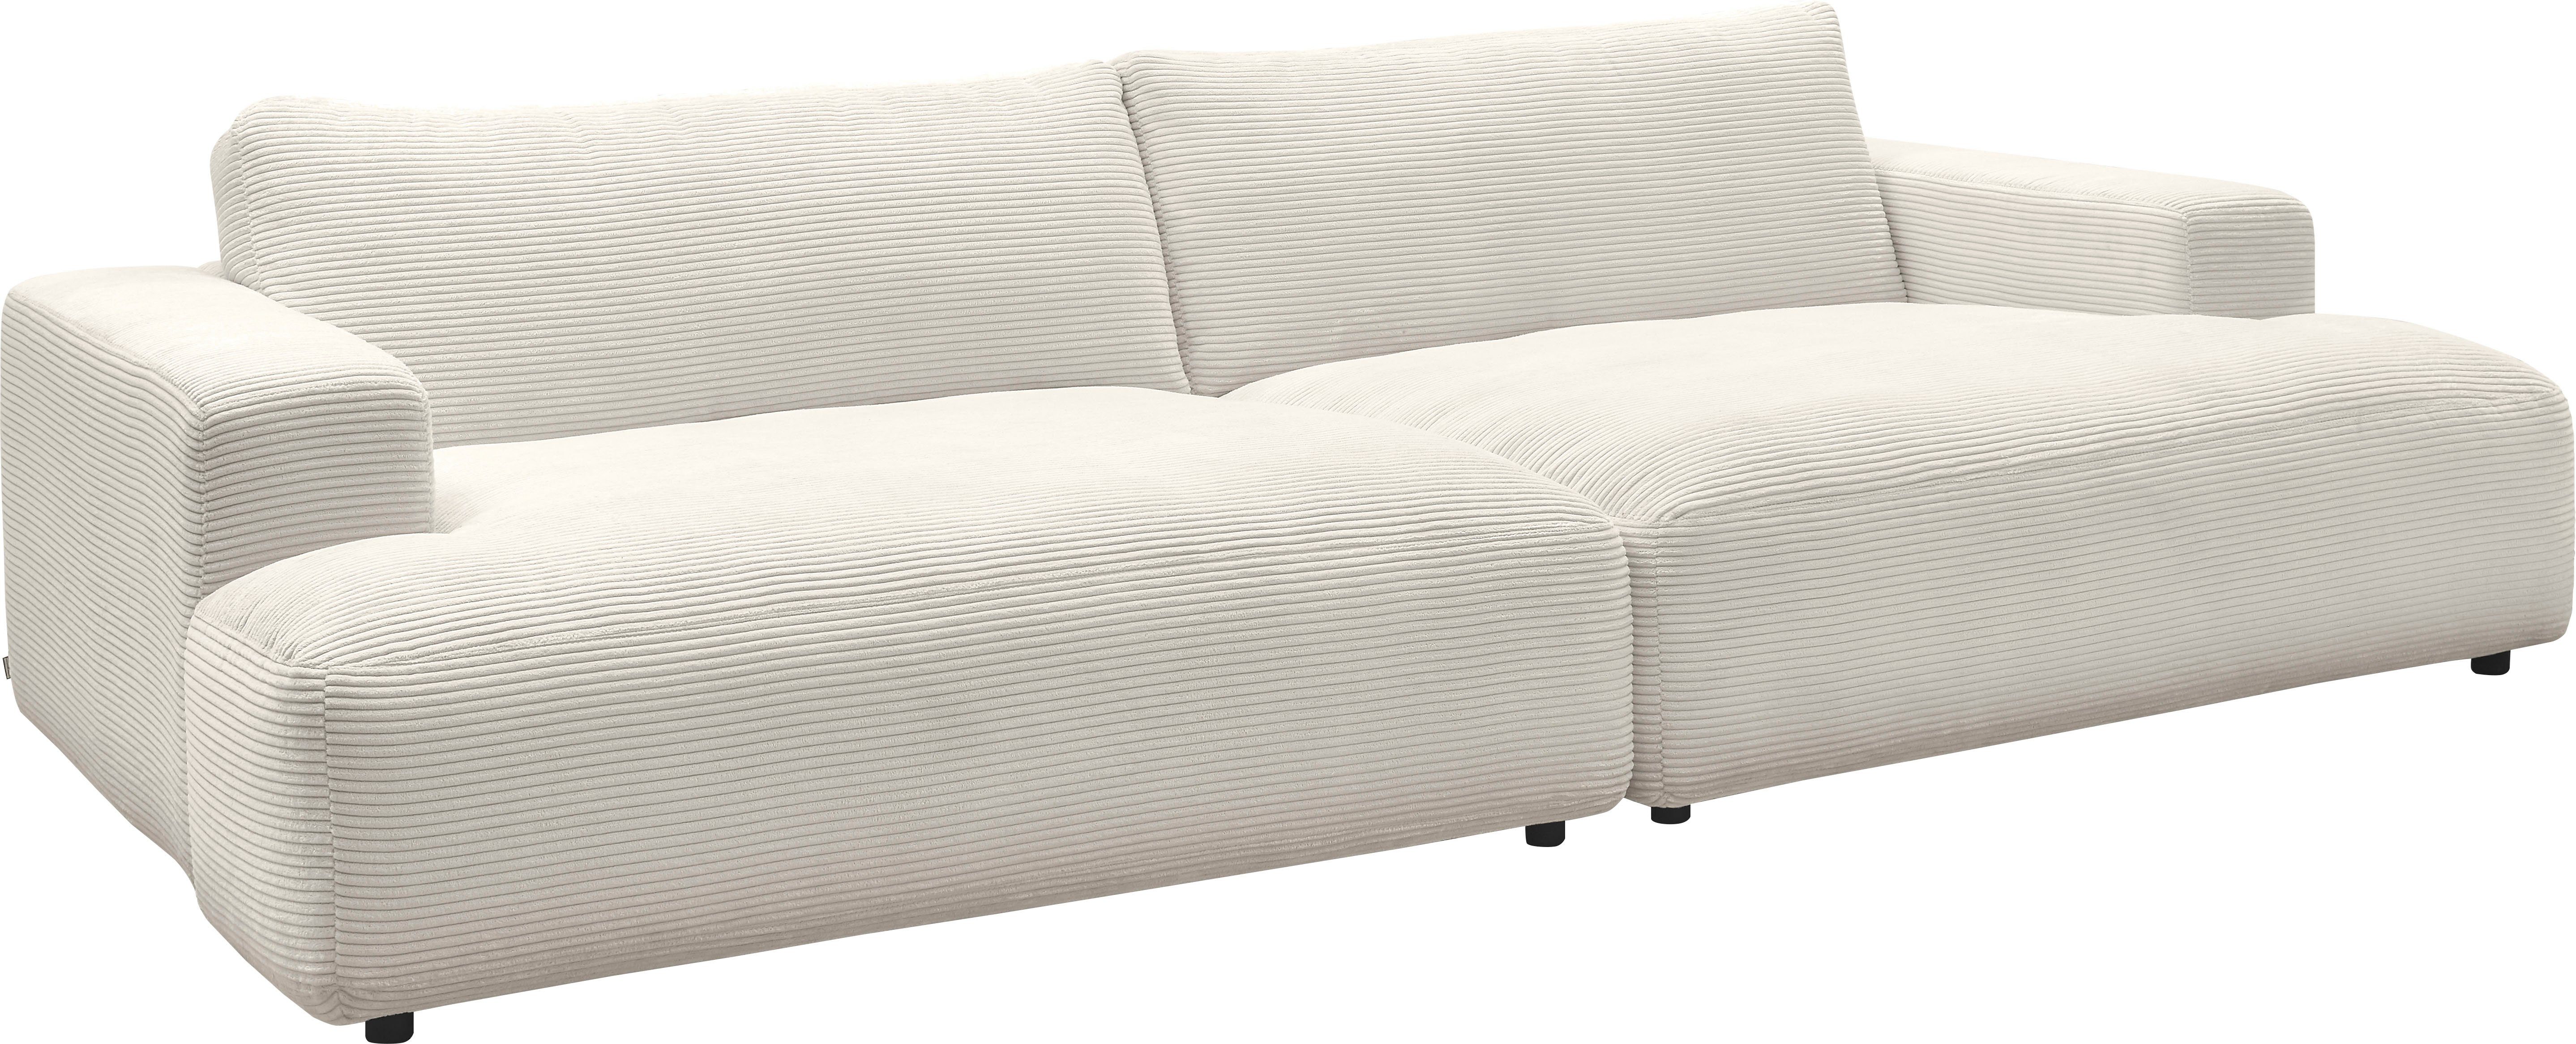 GALLERY M branded by Musterring cm Cord-Bezug, Breite Lucia, snow 292 Loungesofa